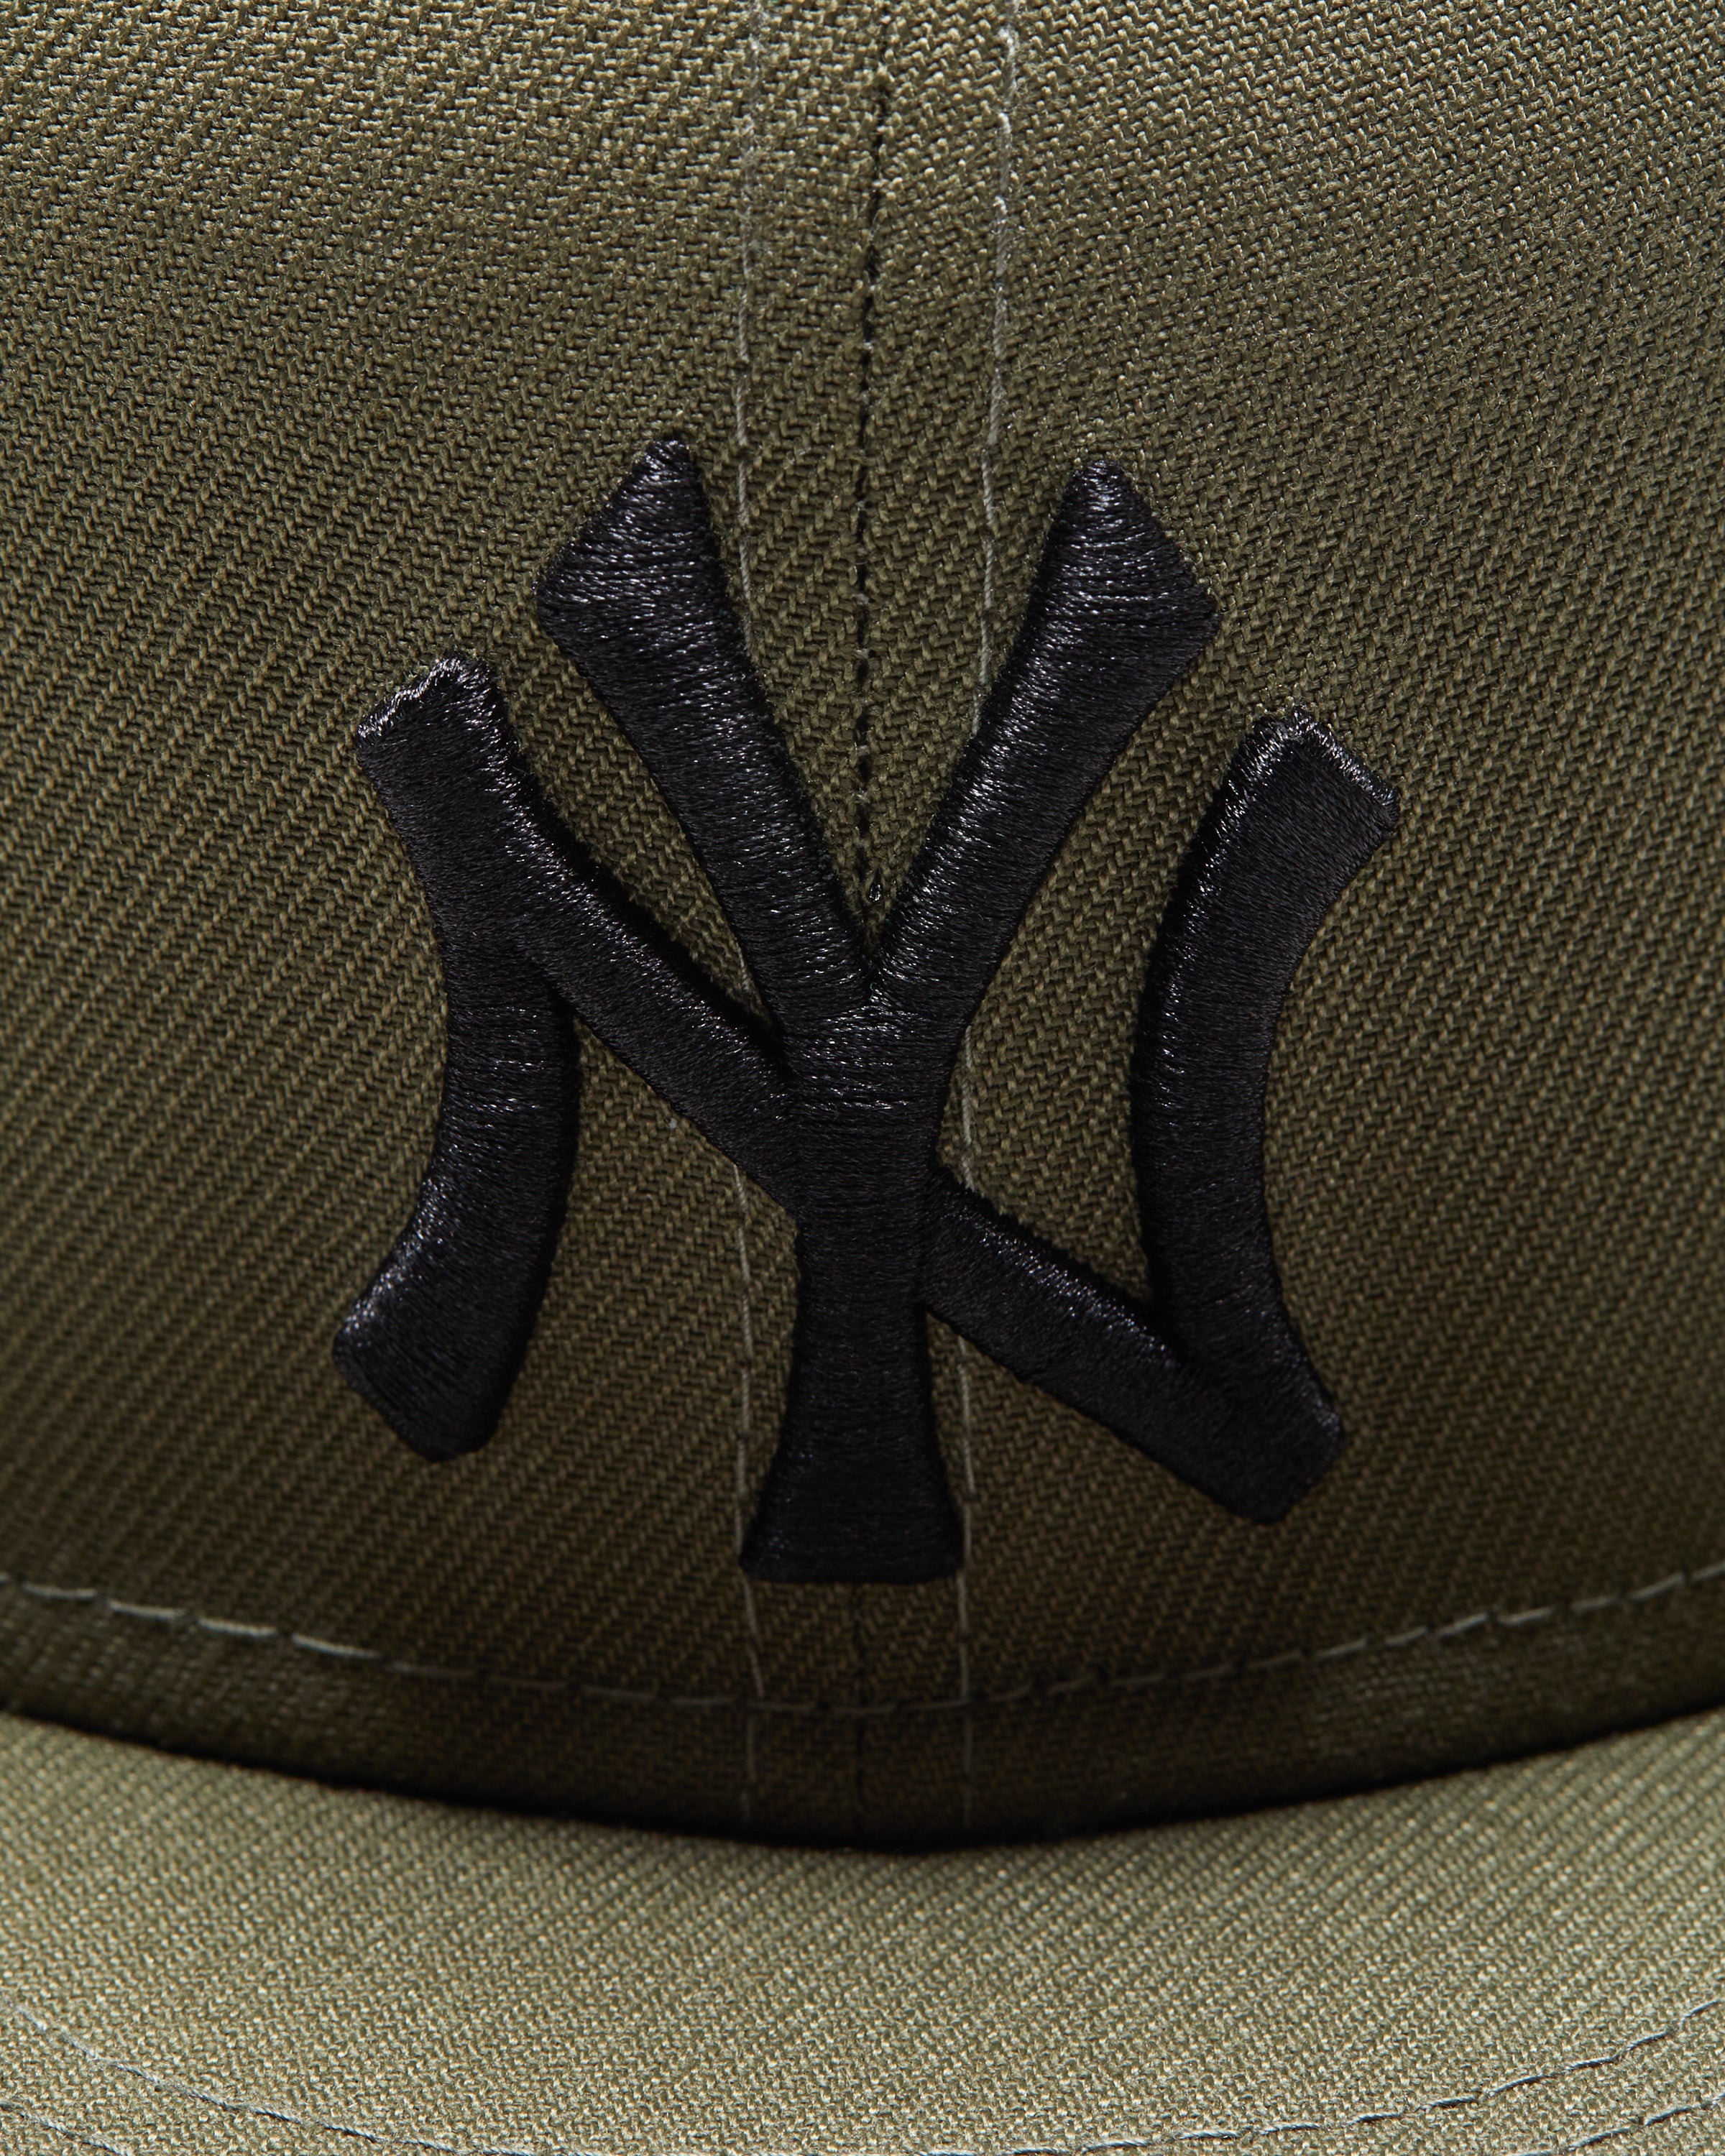 New Era New York Yankees 59FIFTY Fitted Hat